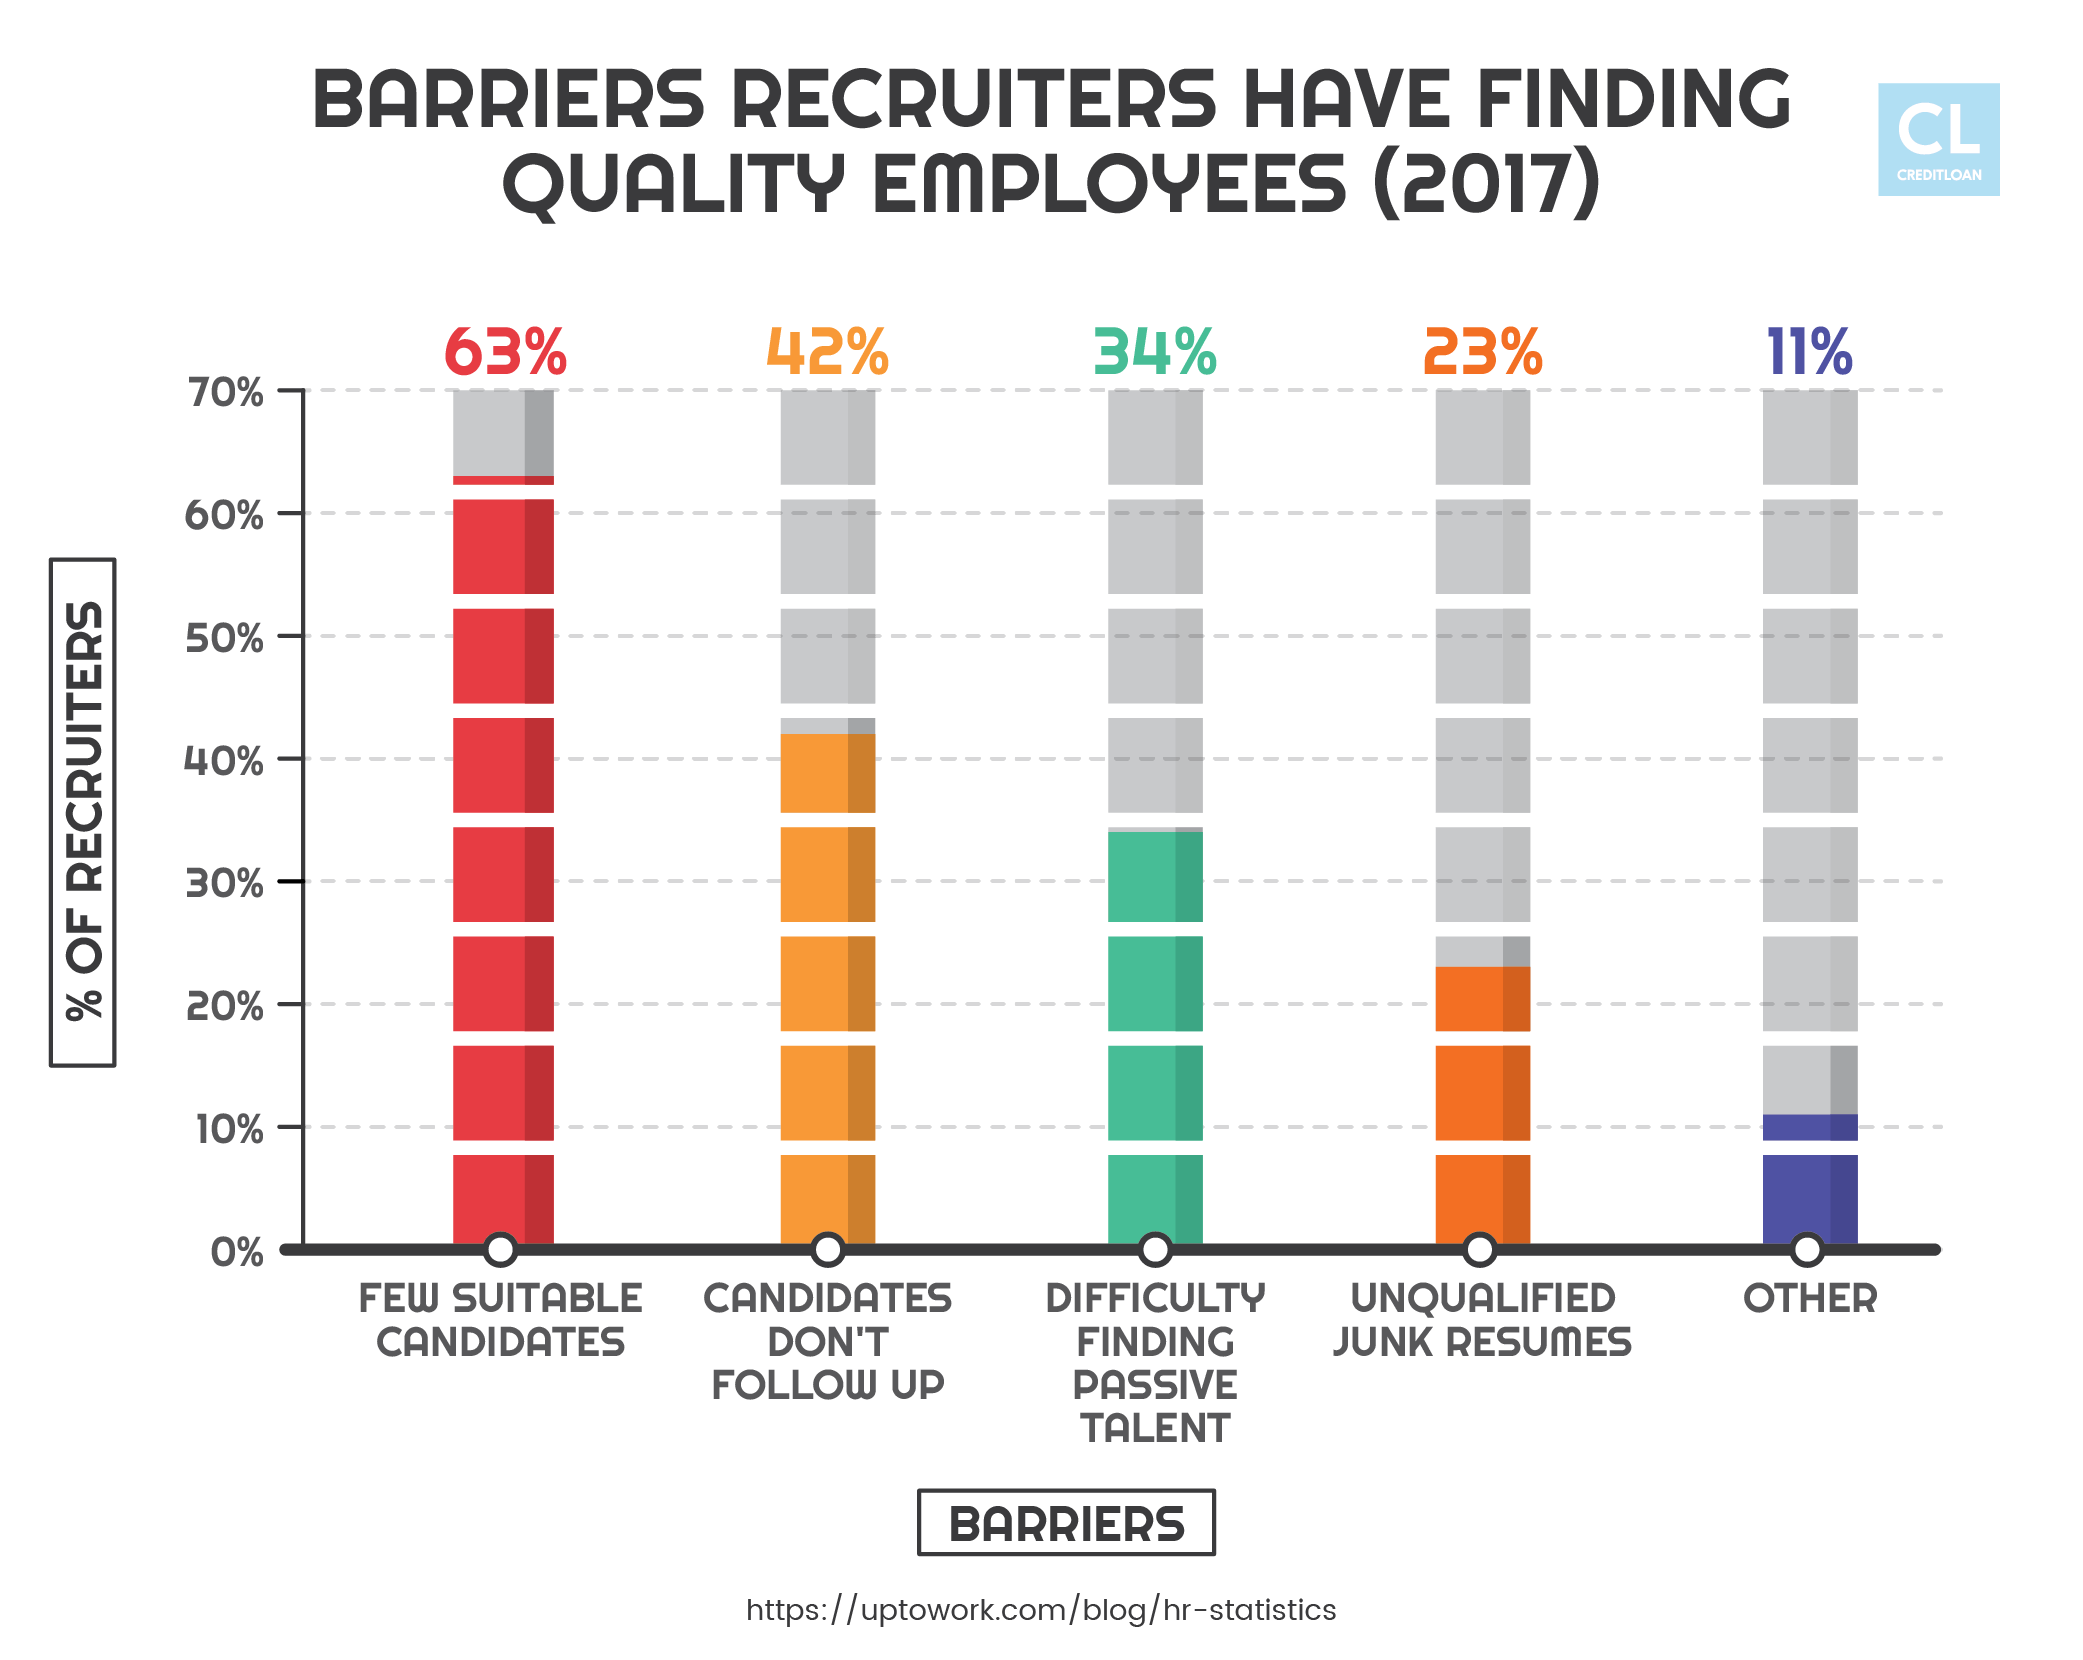 Barriers recruiters have in finding quality employees in 2017